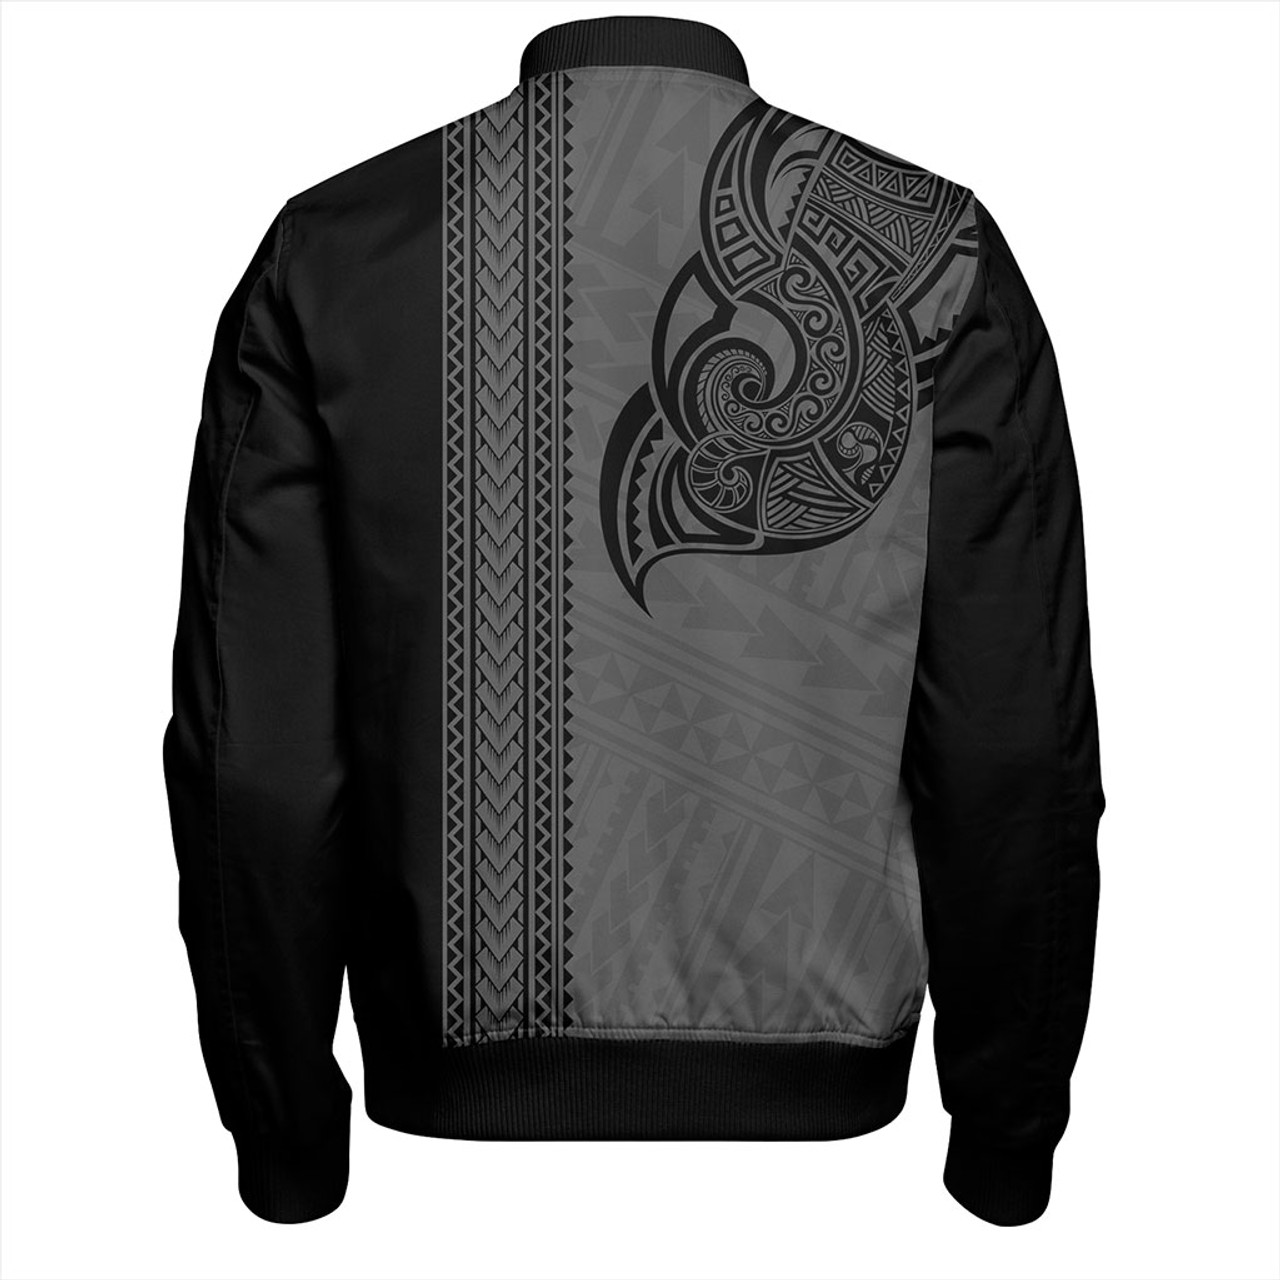 Federated States Of Micronesia Bomber Jacket Polynesia Coat Of Arms Tribal Tattoo